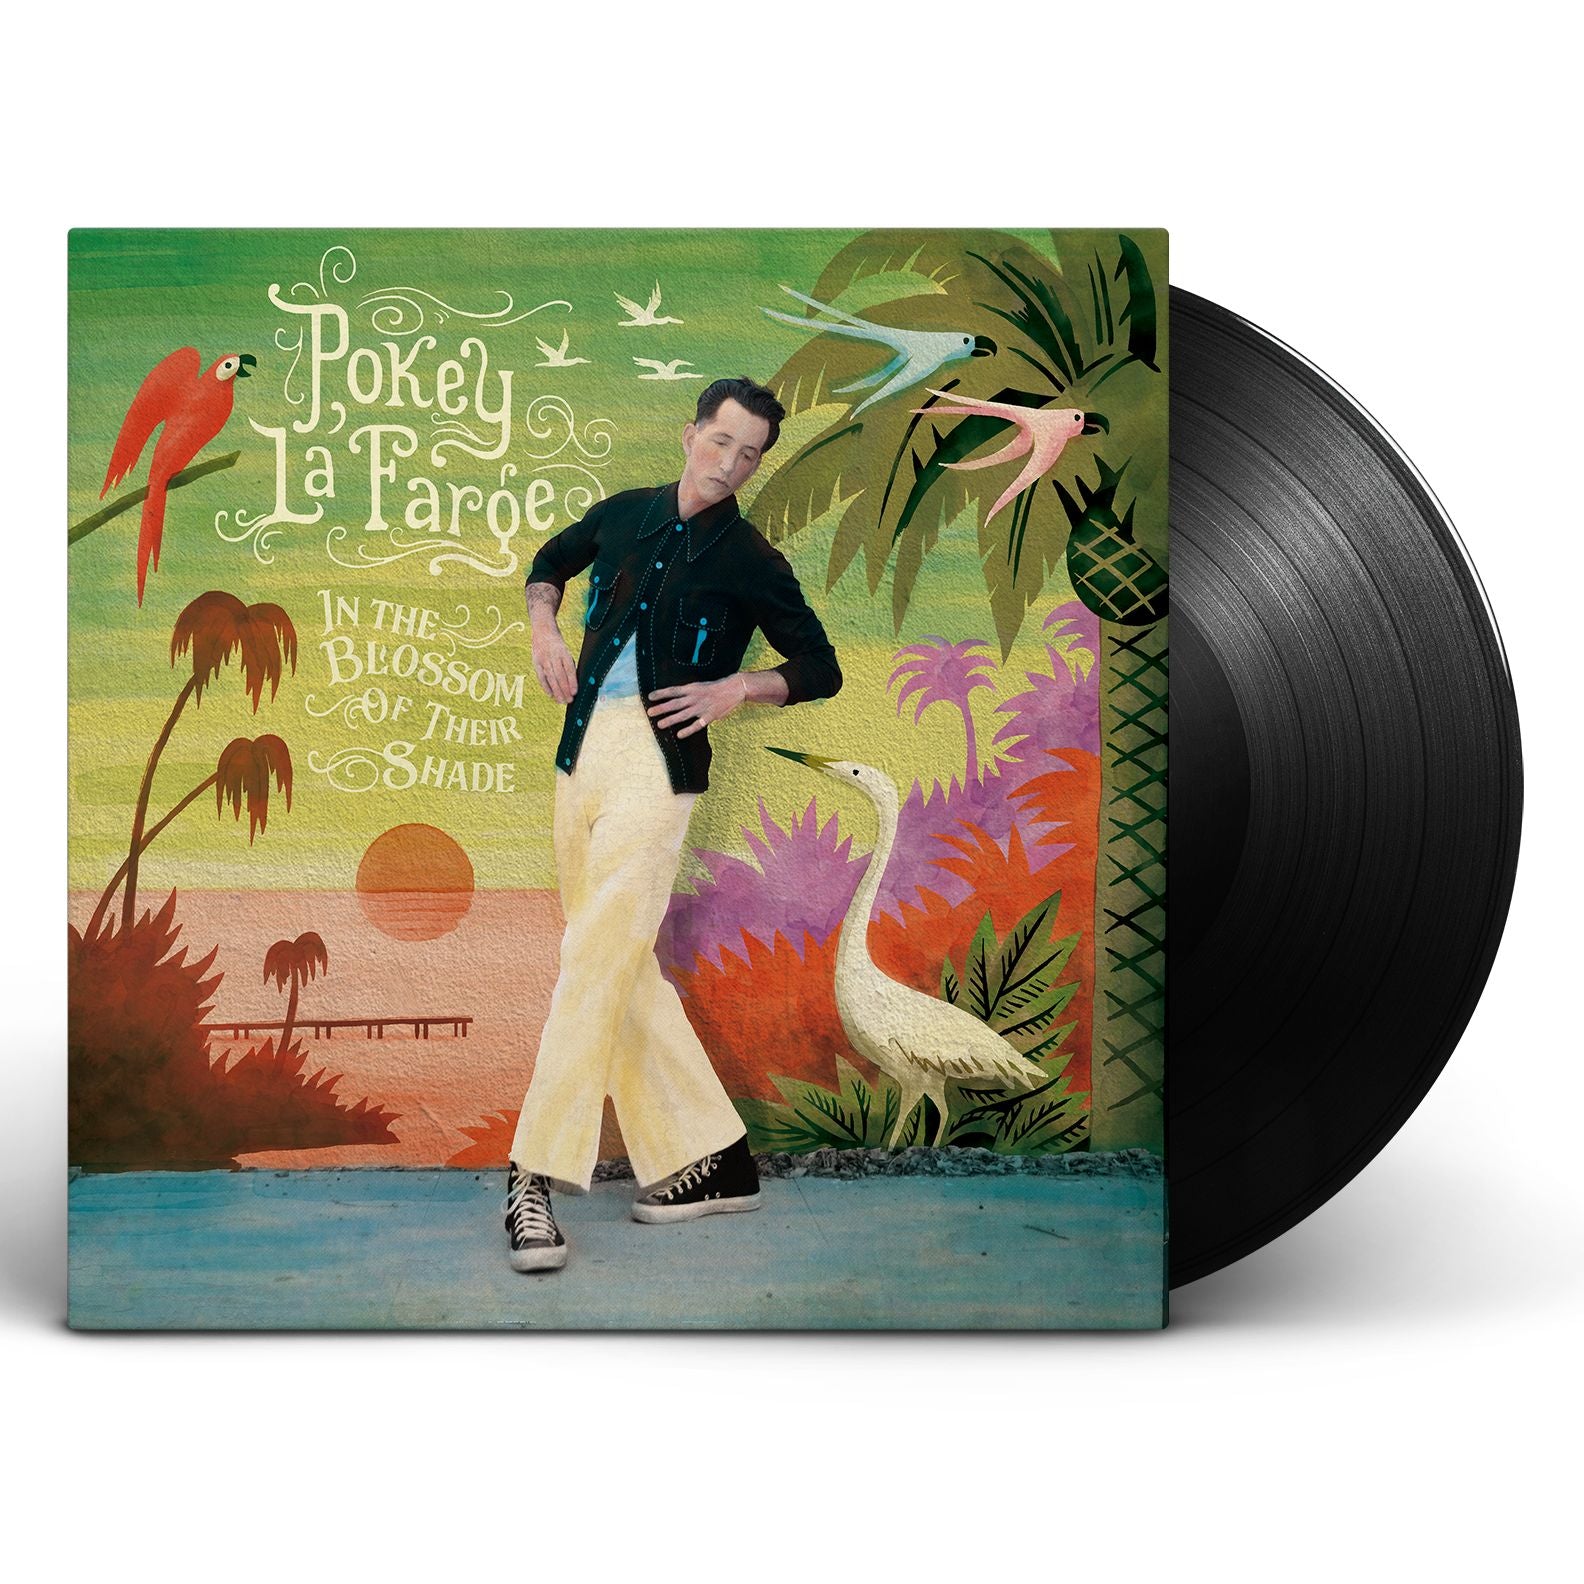 Pokey LaFarge - In The Blossom of Their Shade [Vinyl]